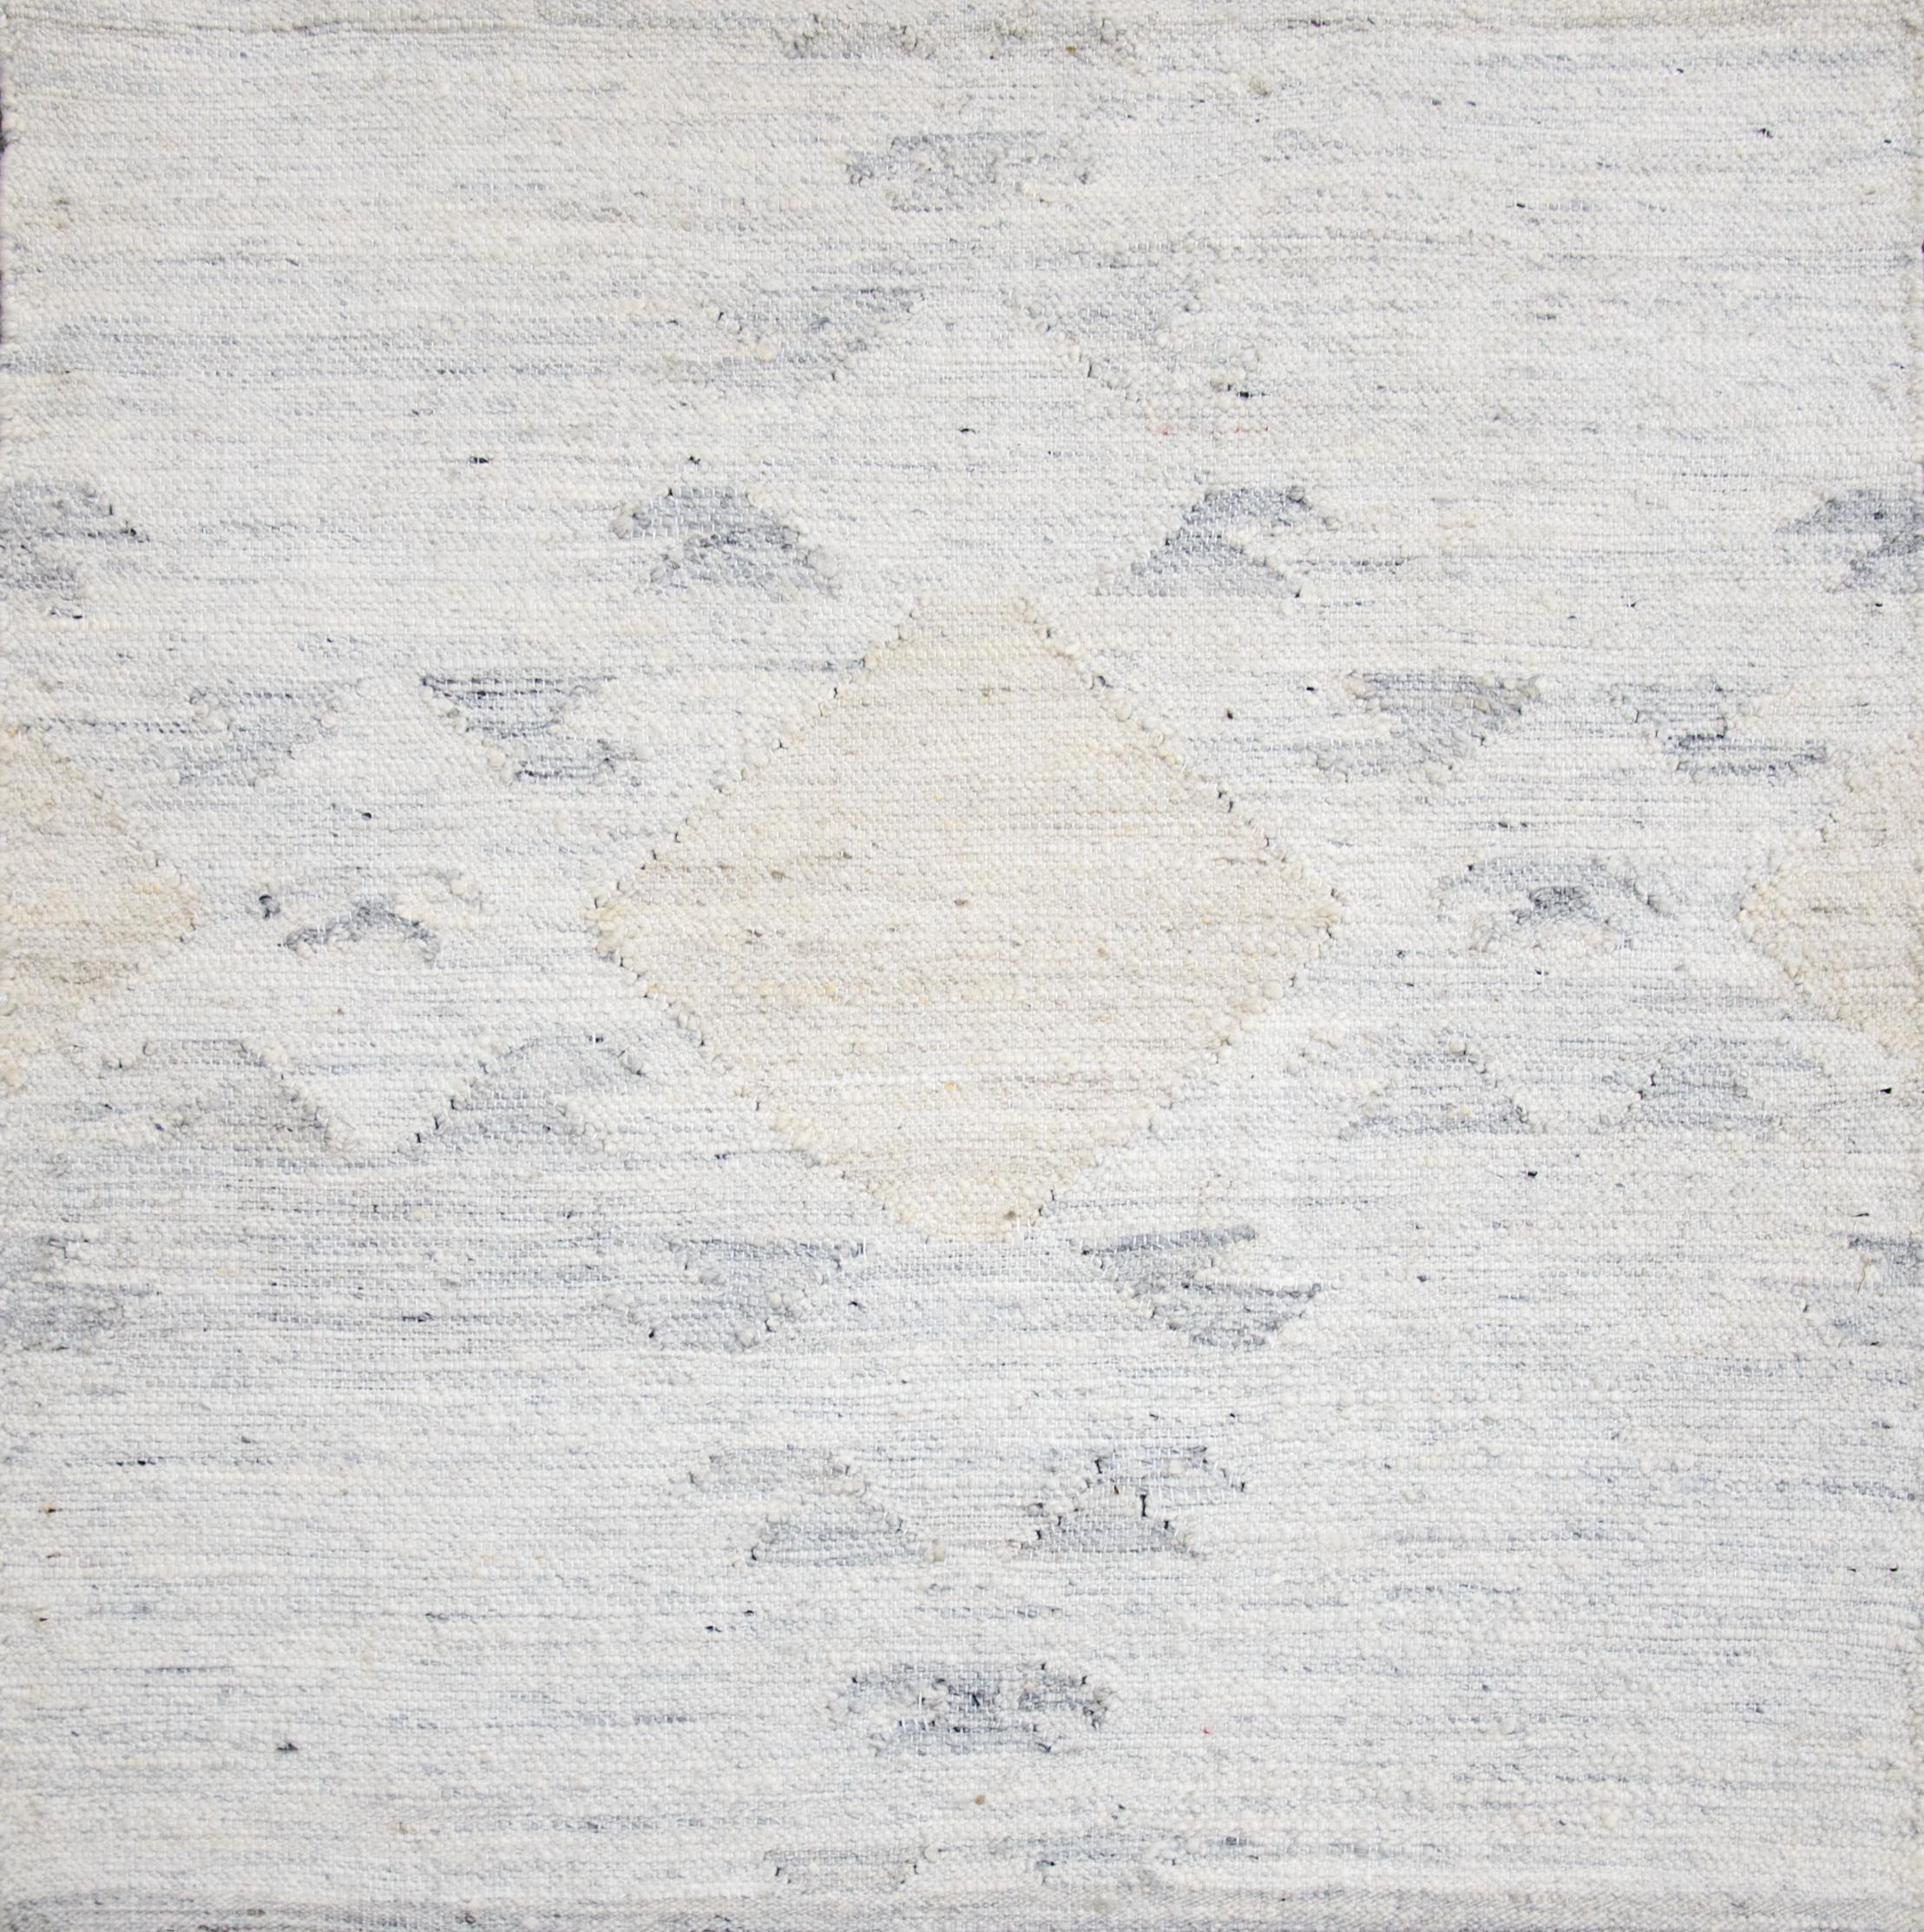 Modern area rug handwoven in Scandinavian design using fine wool and organic dyes. It features an exquisite gray field with brown diamond design patterns all-over. This piece will surely look fabulous in modern and contemporary interiors. It has a